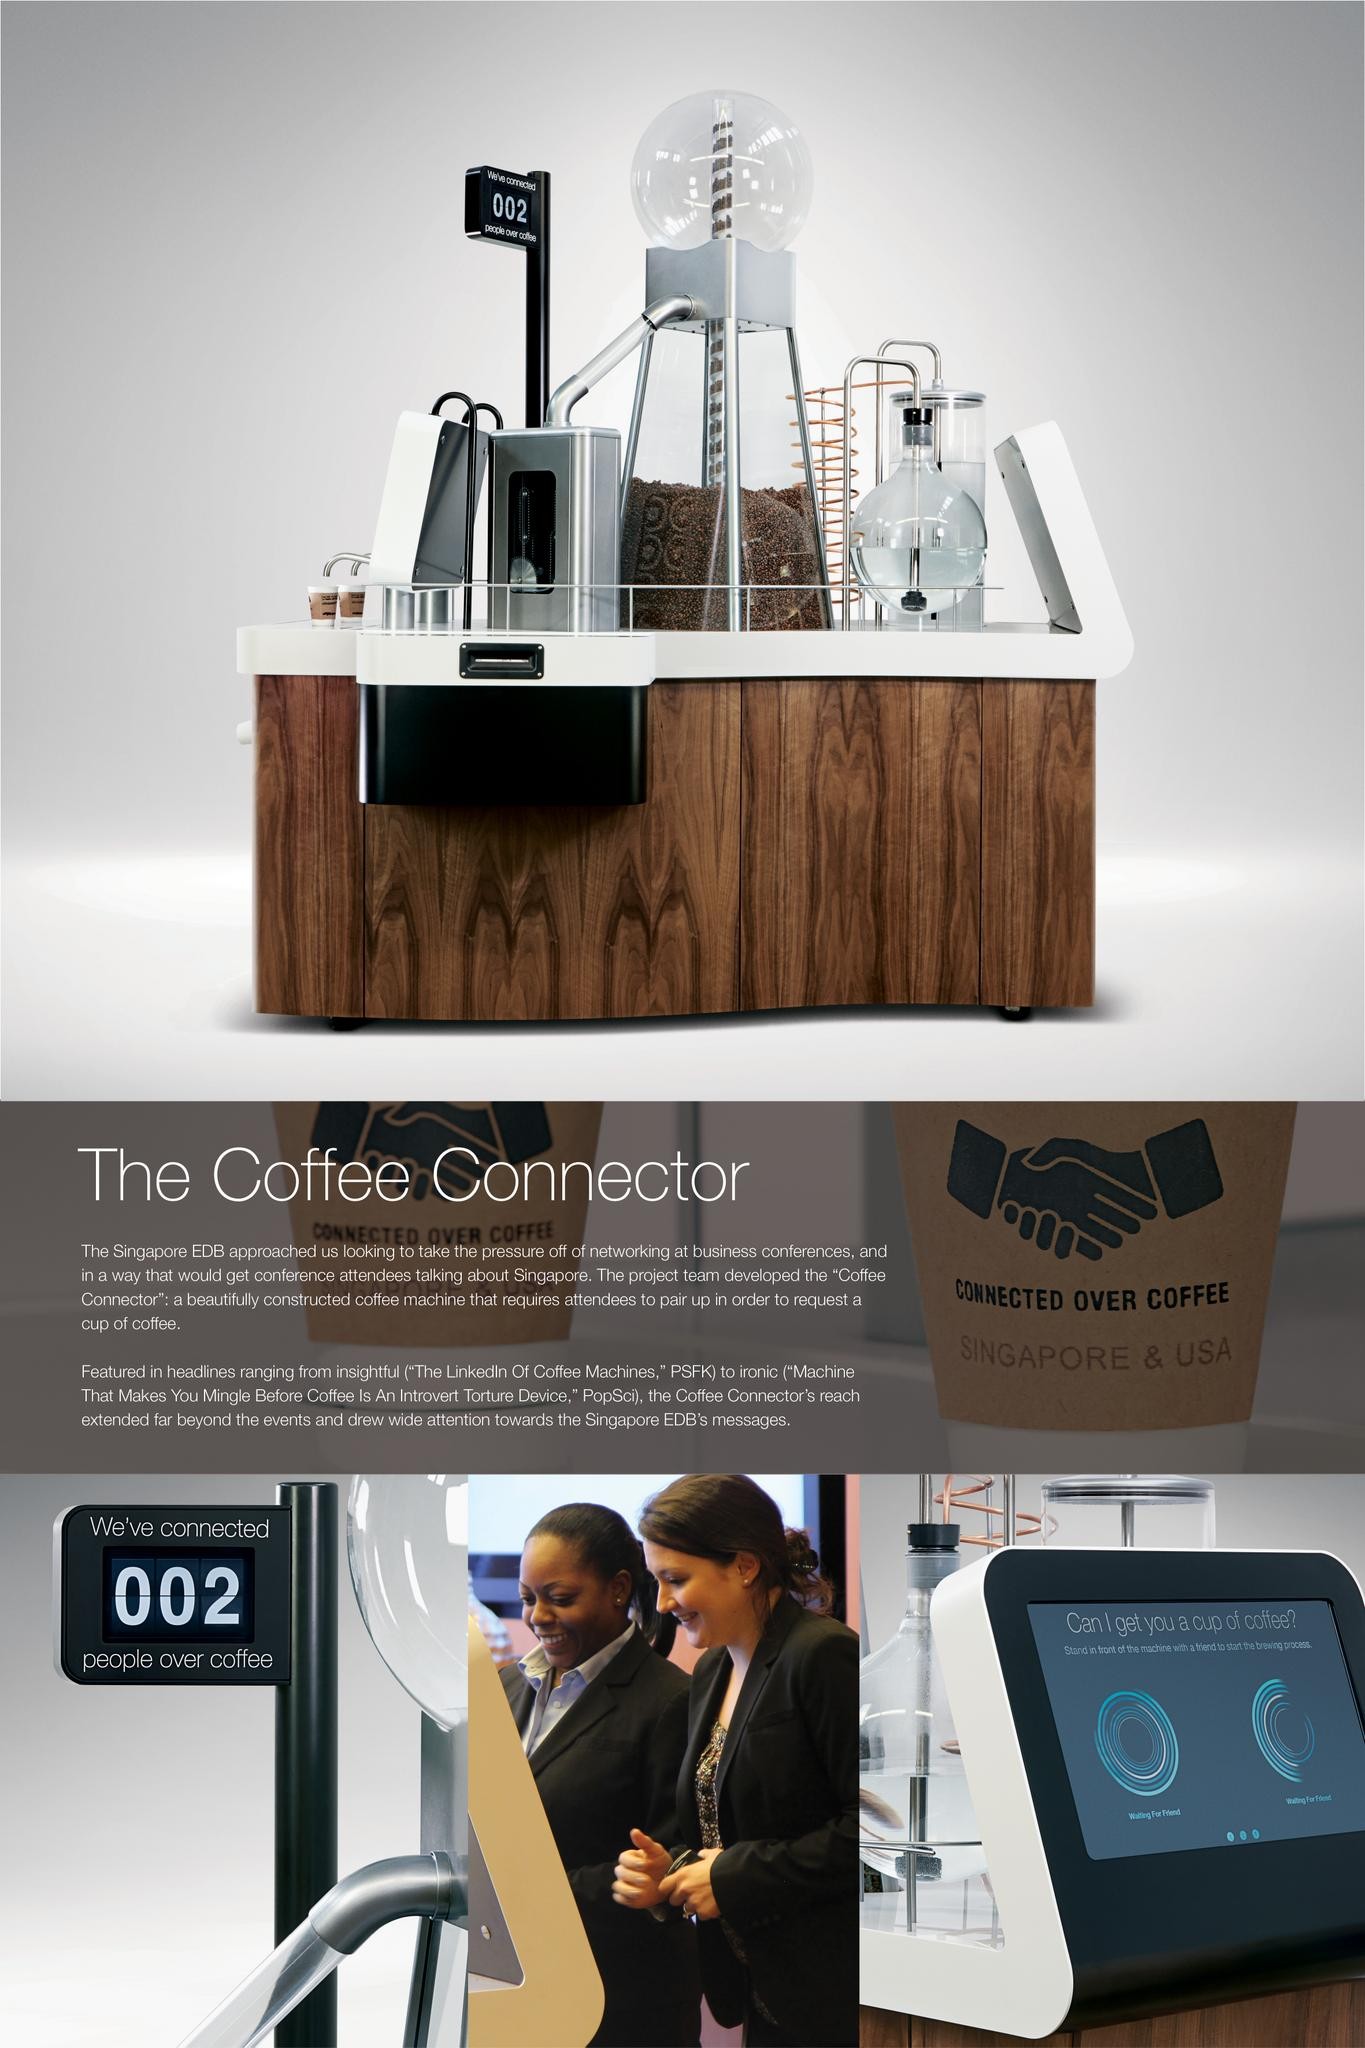 THE COFFEE CONNECTOR